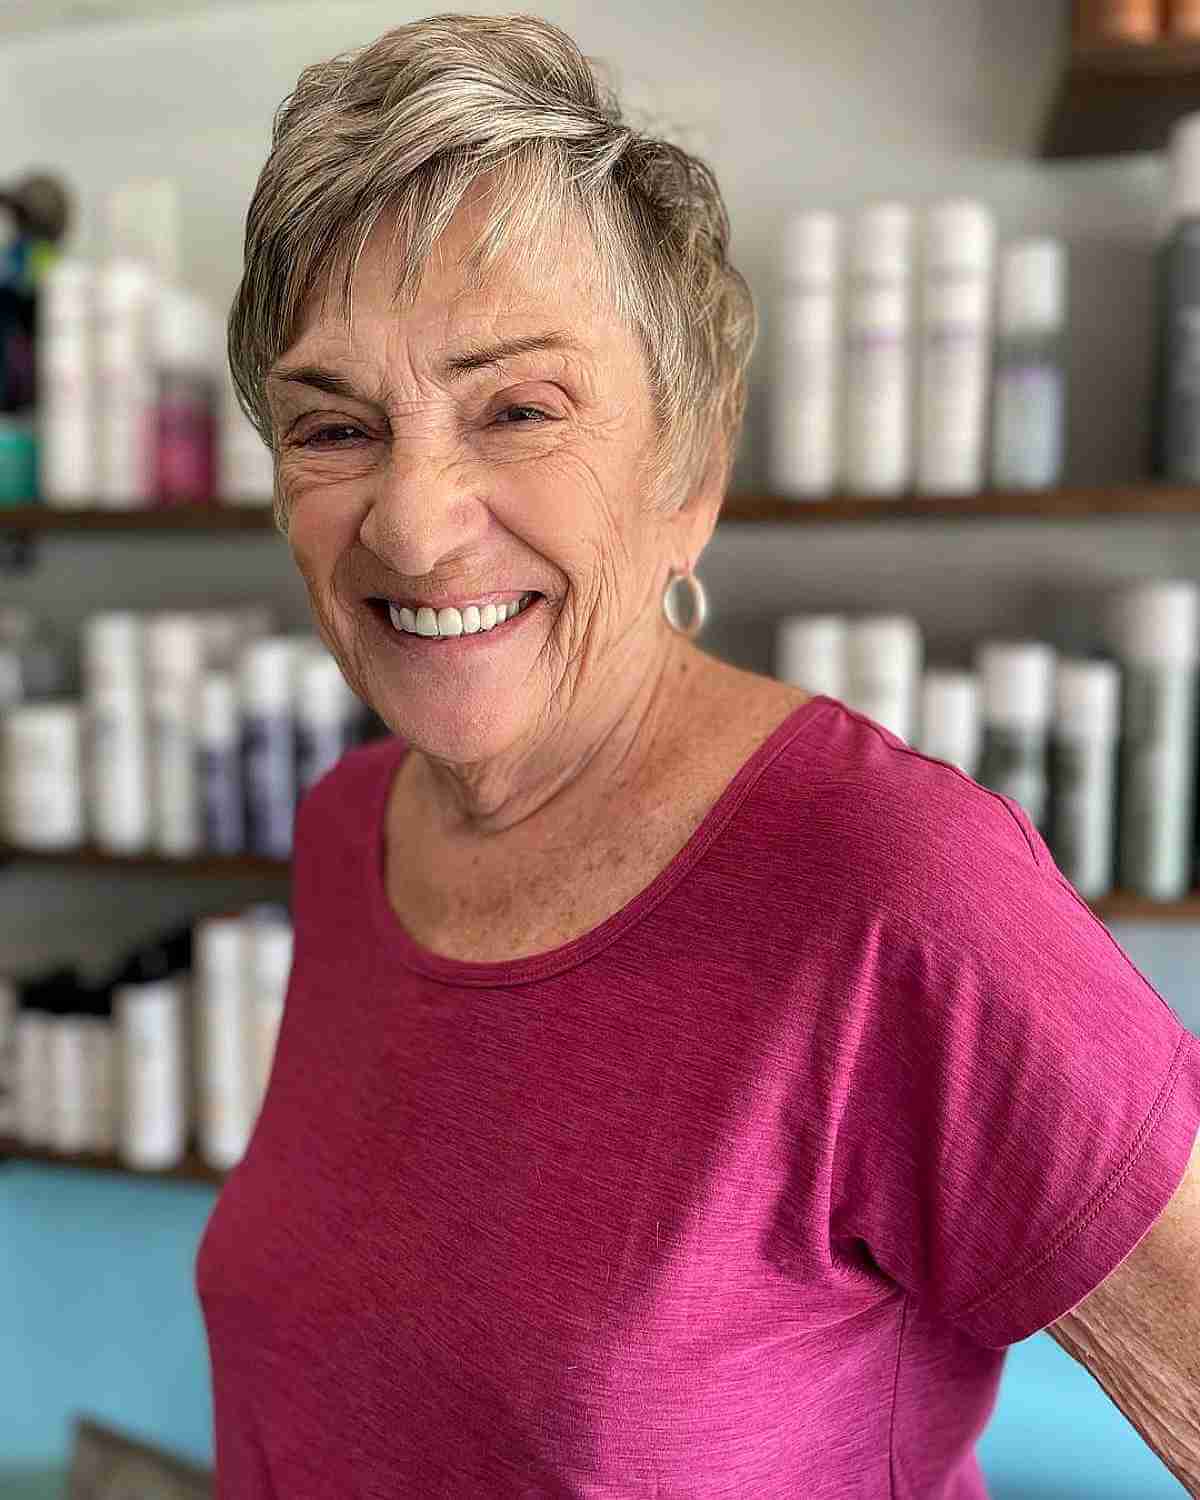 Flattering Highlighted Pixie Hair for Women 70 and Up